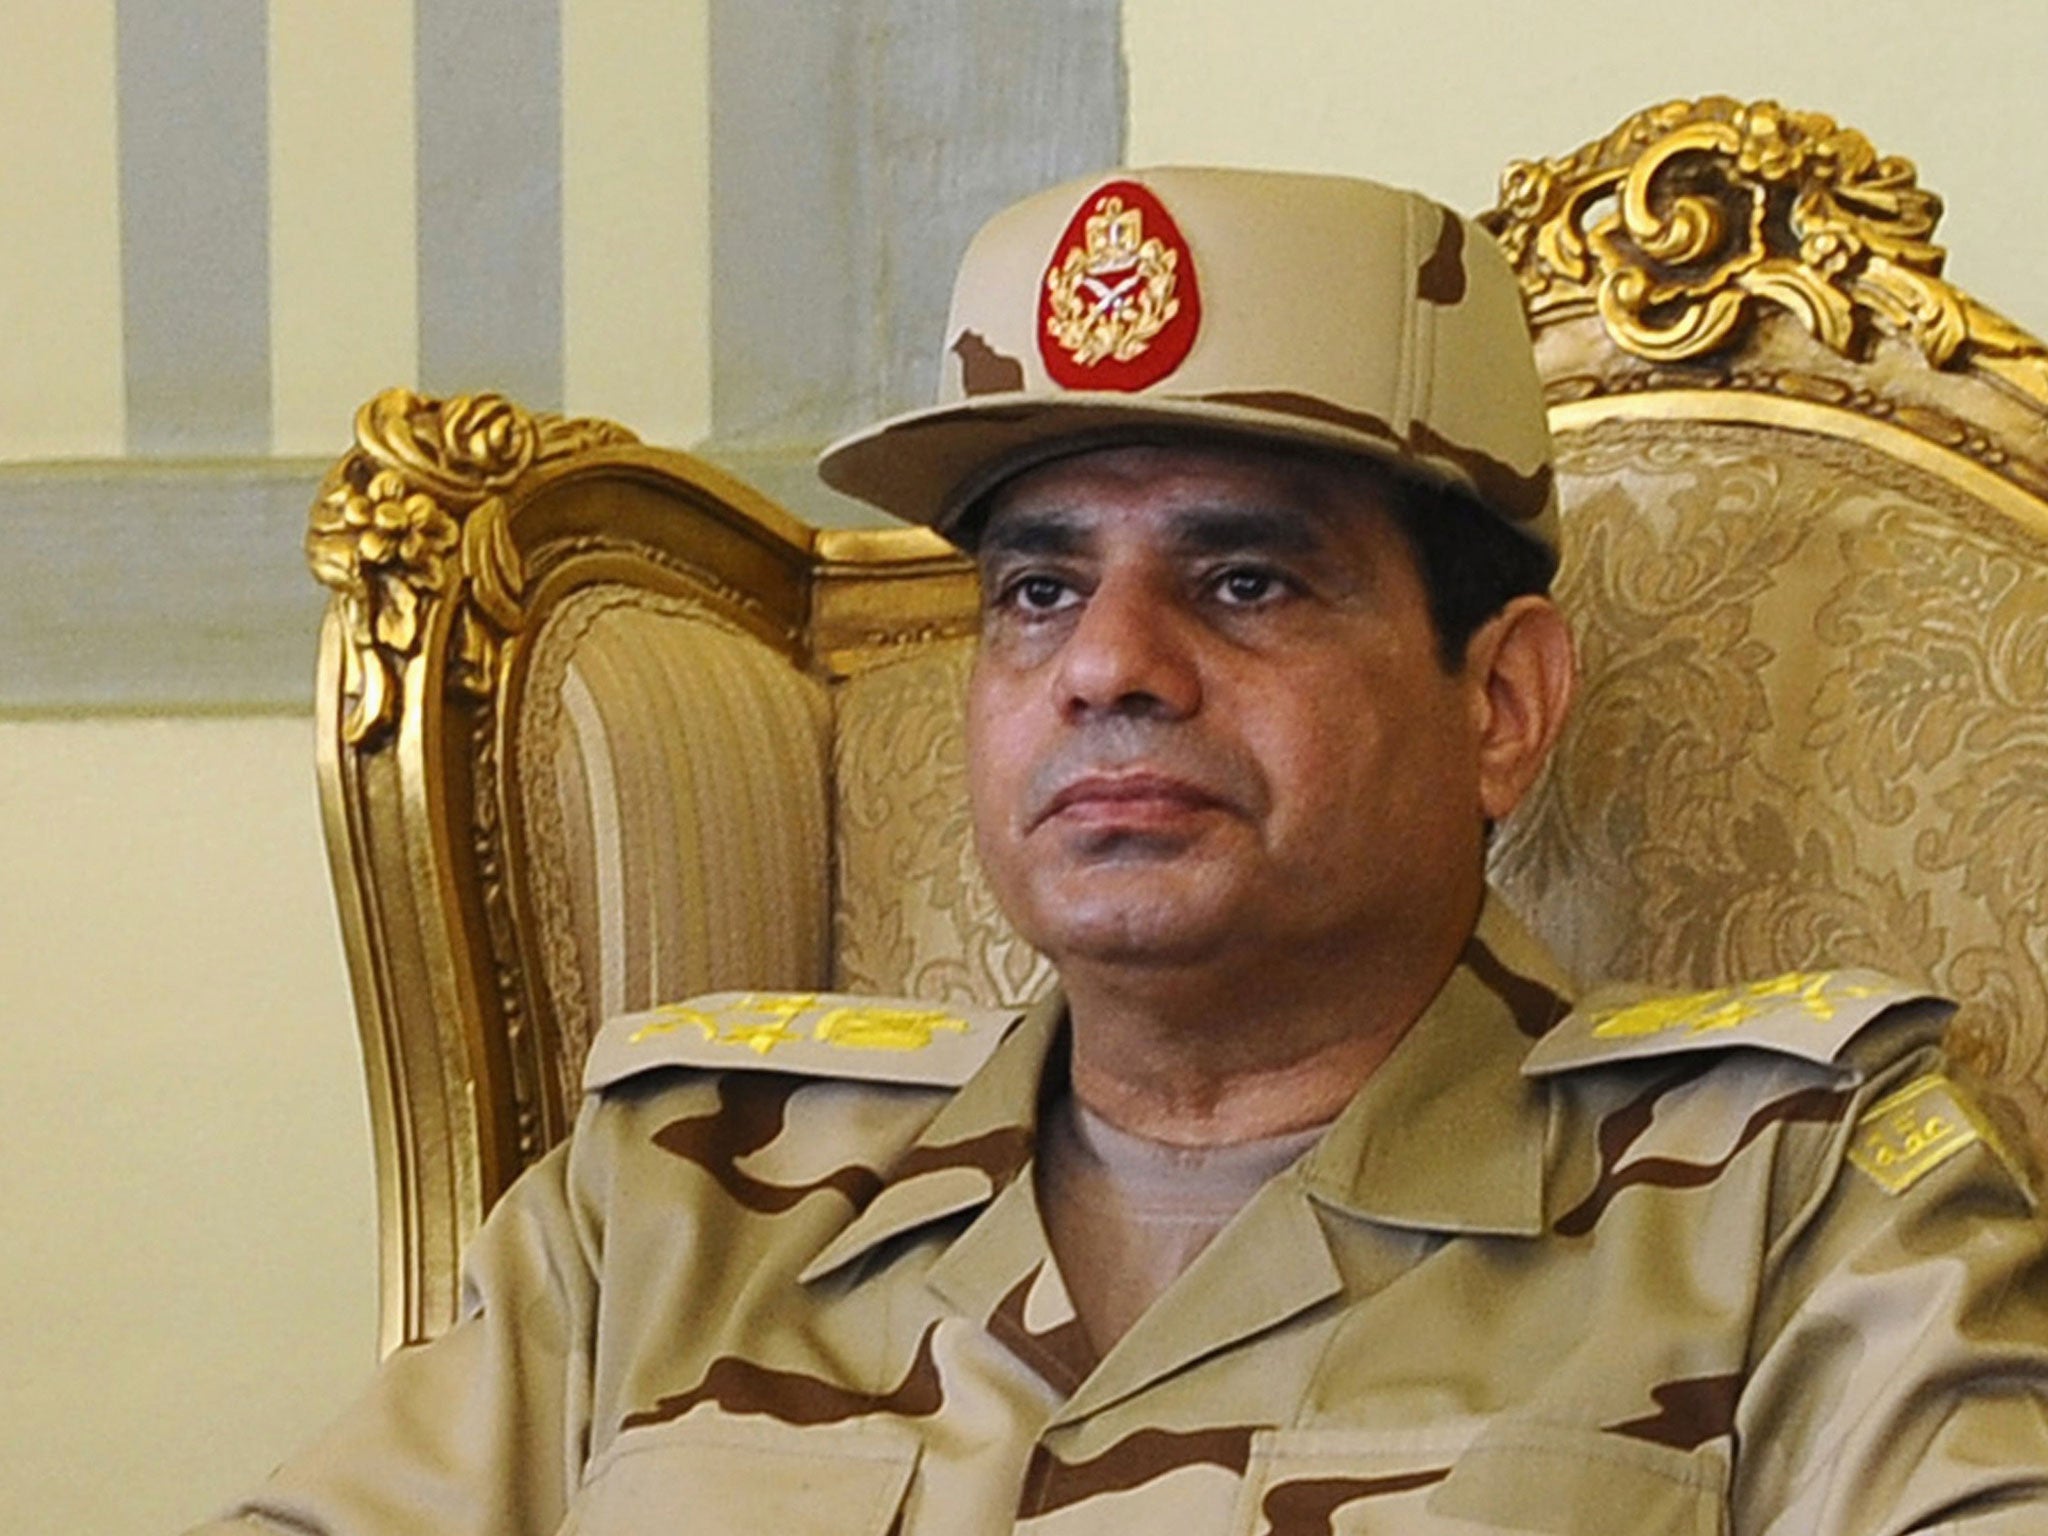 Abdel Fatah al-Sisi staged a coup in 2013 to remove his democratically elected Islamist predecessor, Mohamed Morsi